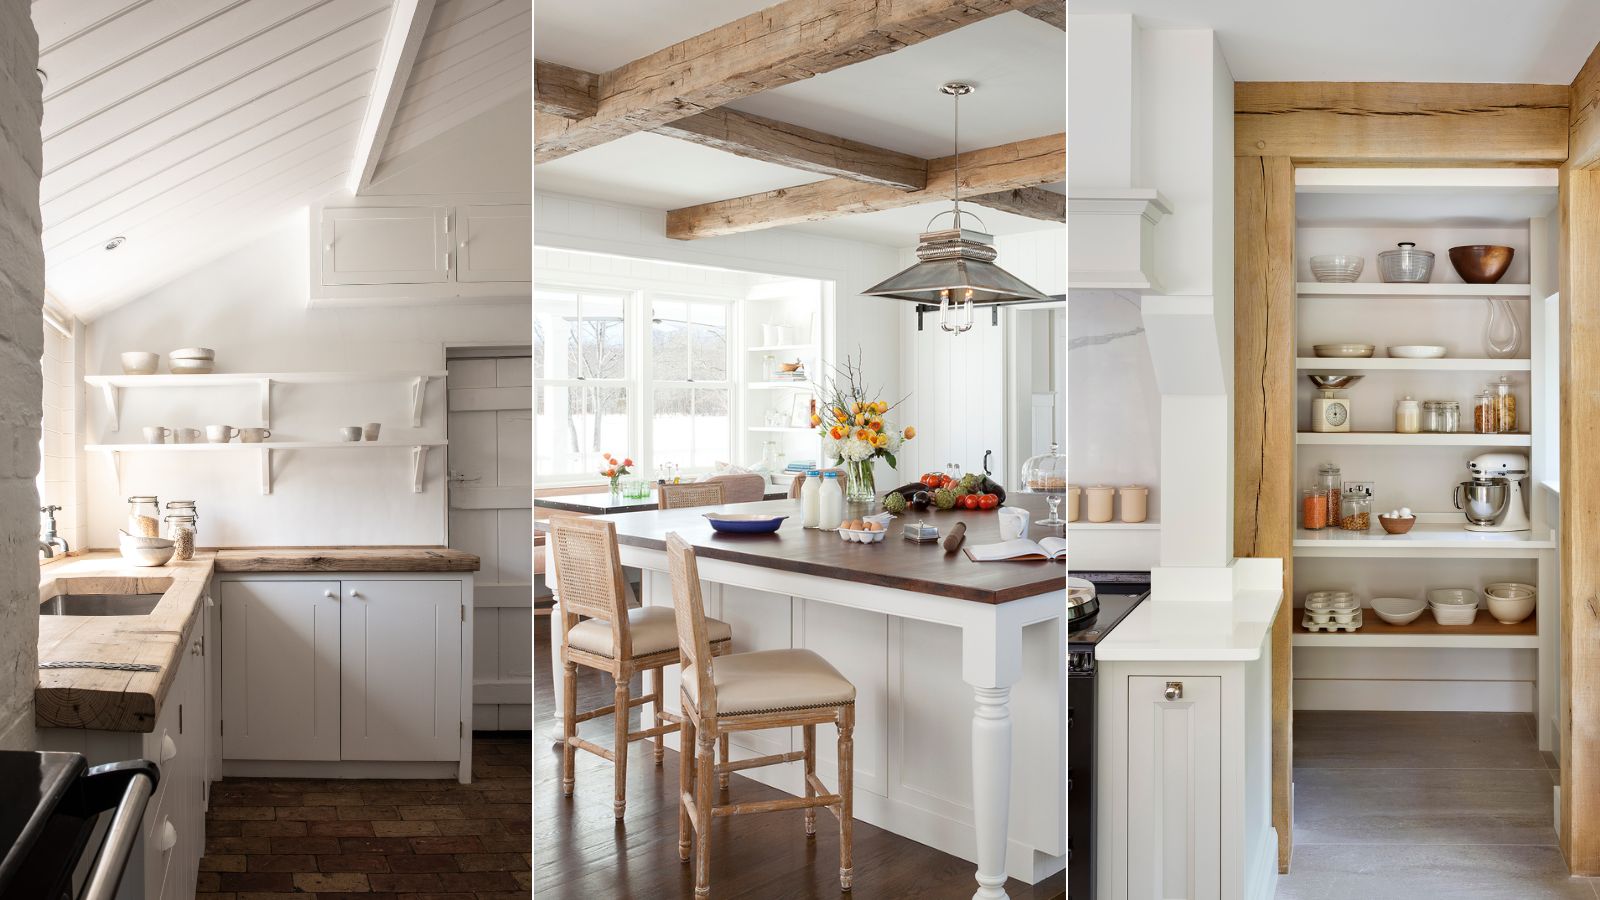 French country kitchen ideas: 60 chic spaces you'll love